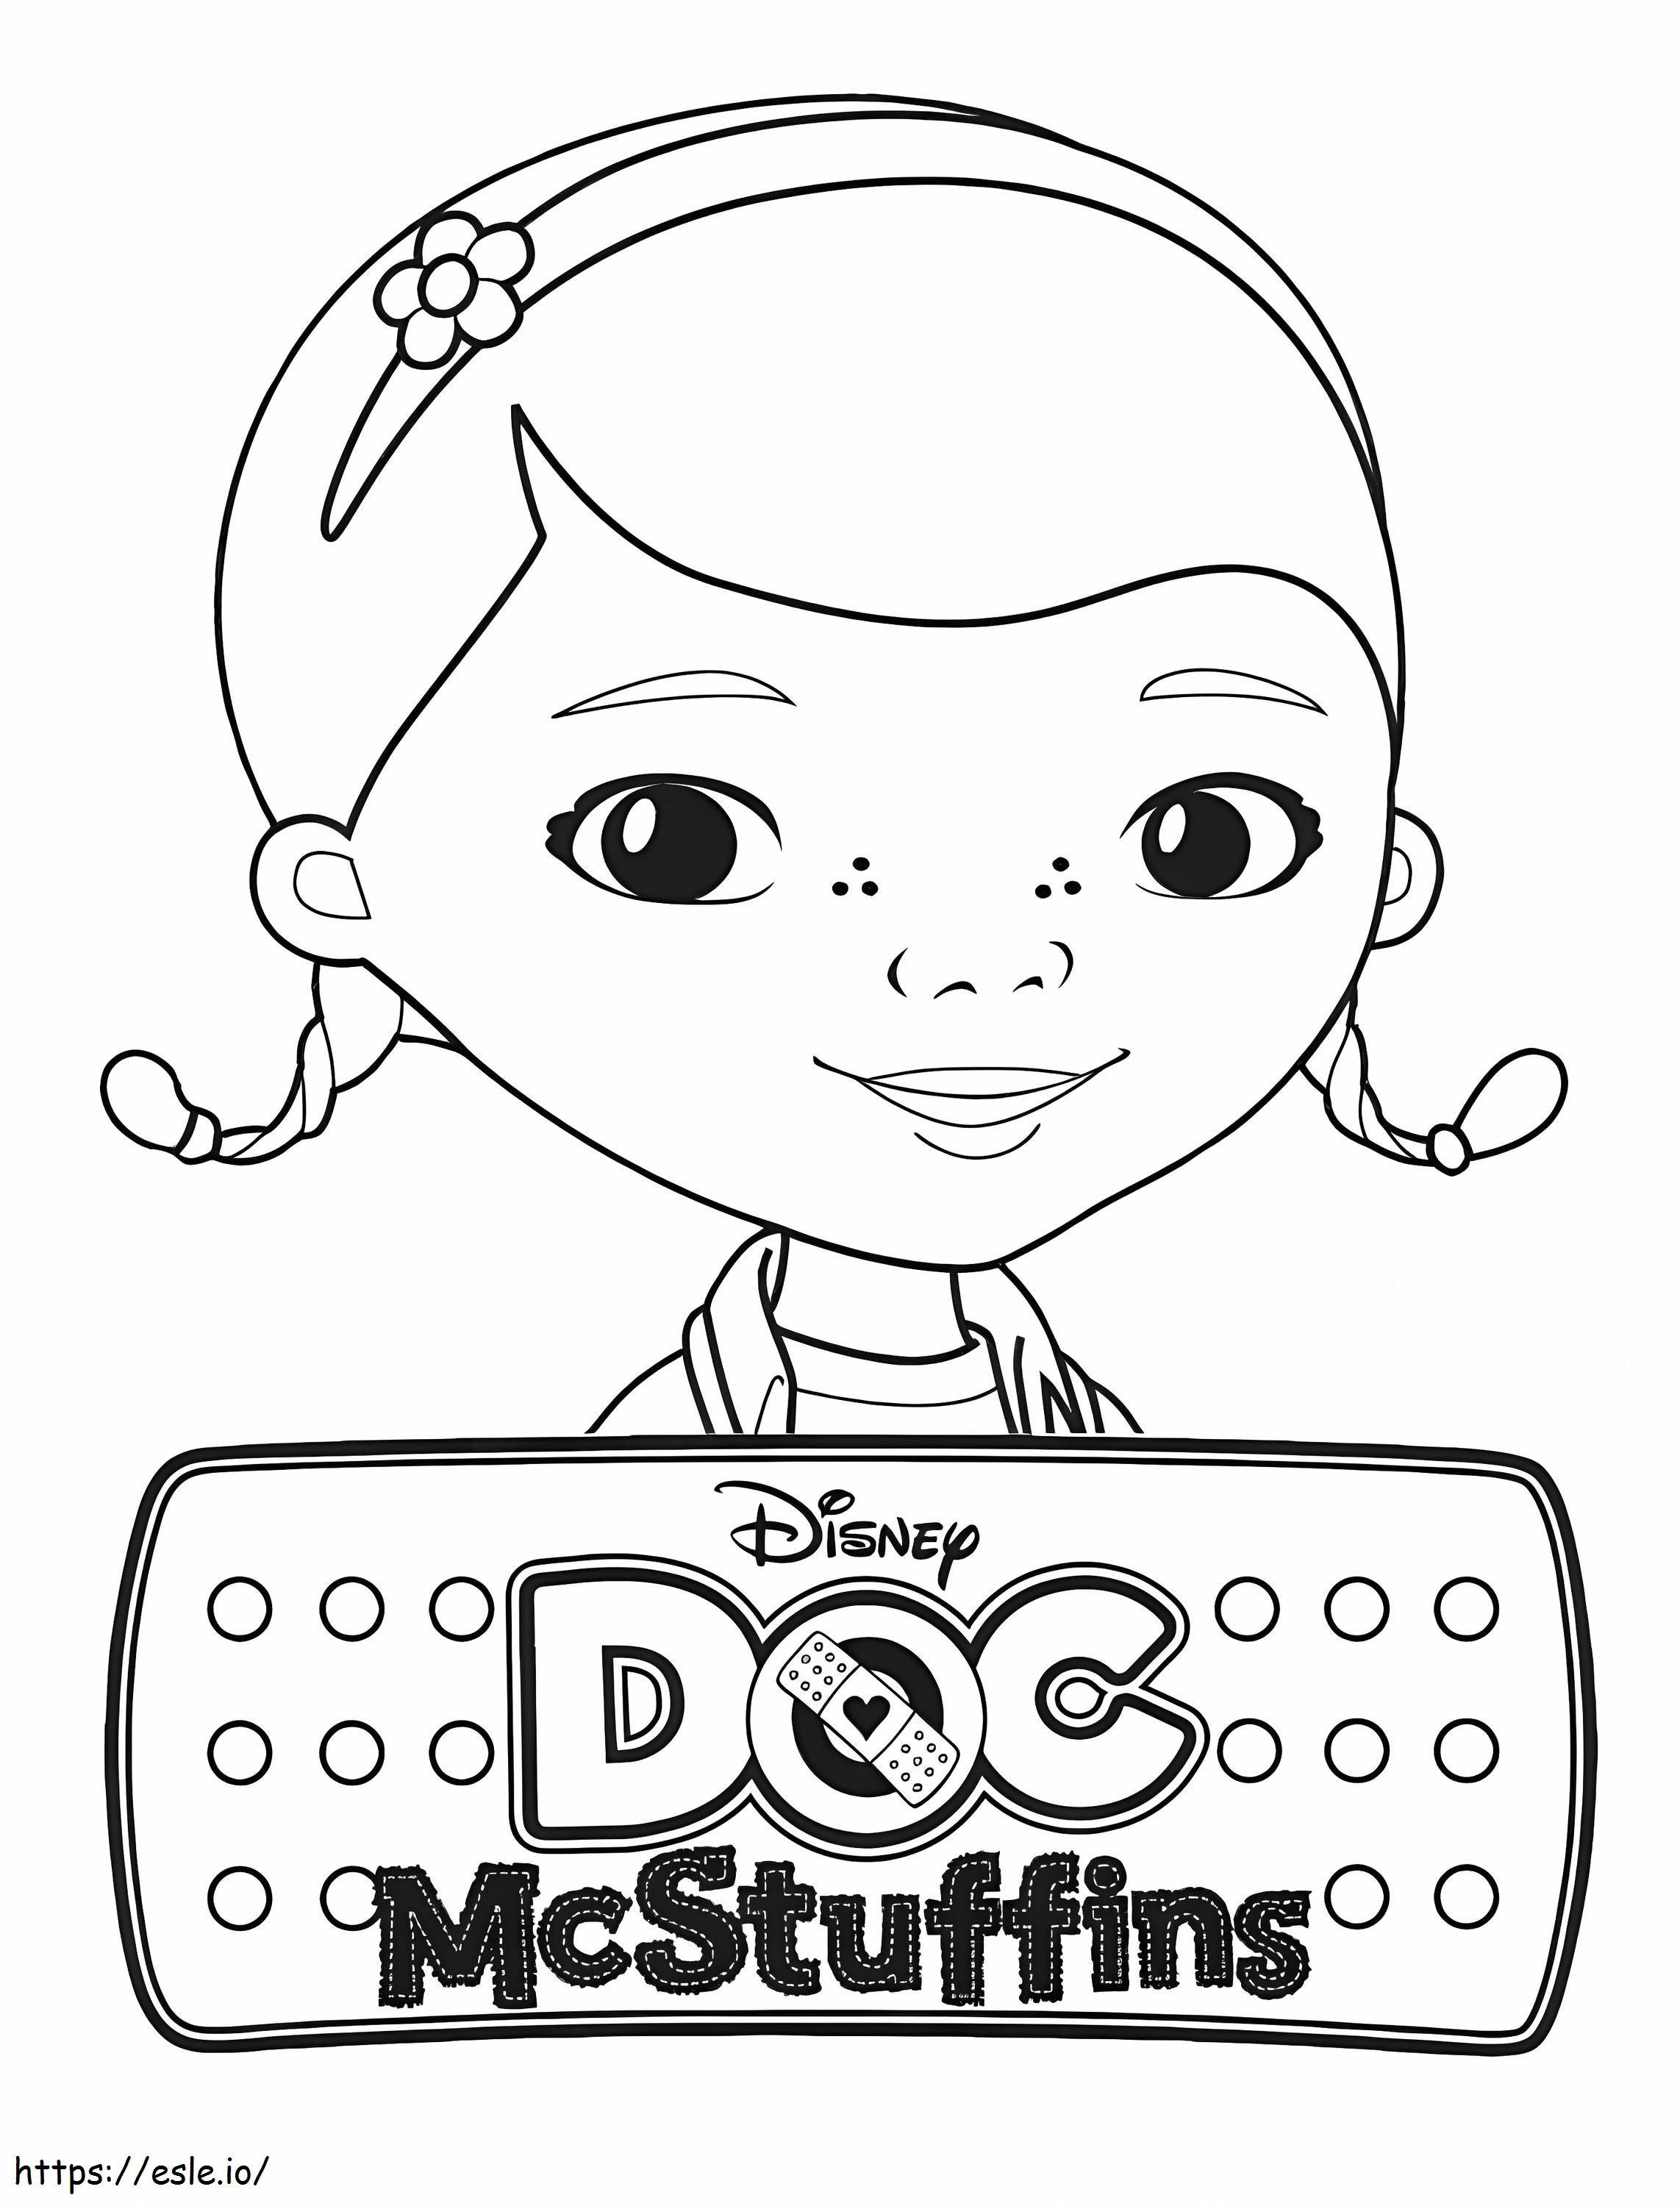 Lovely Doc McStuffins coloring page